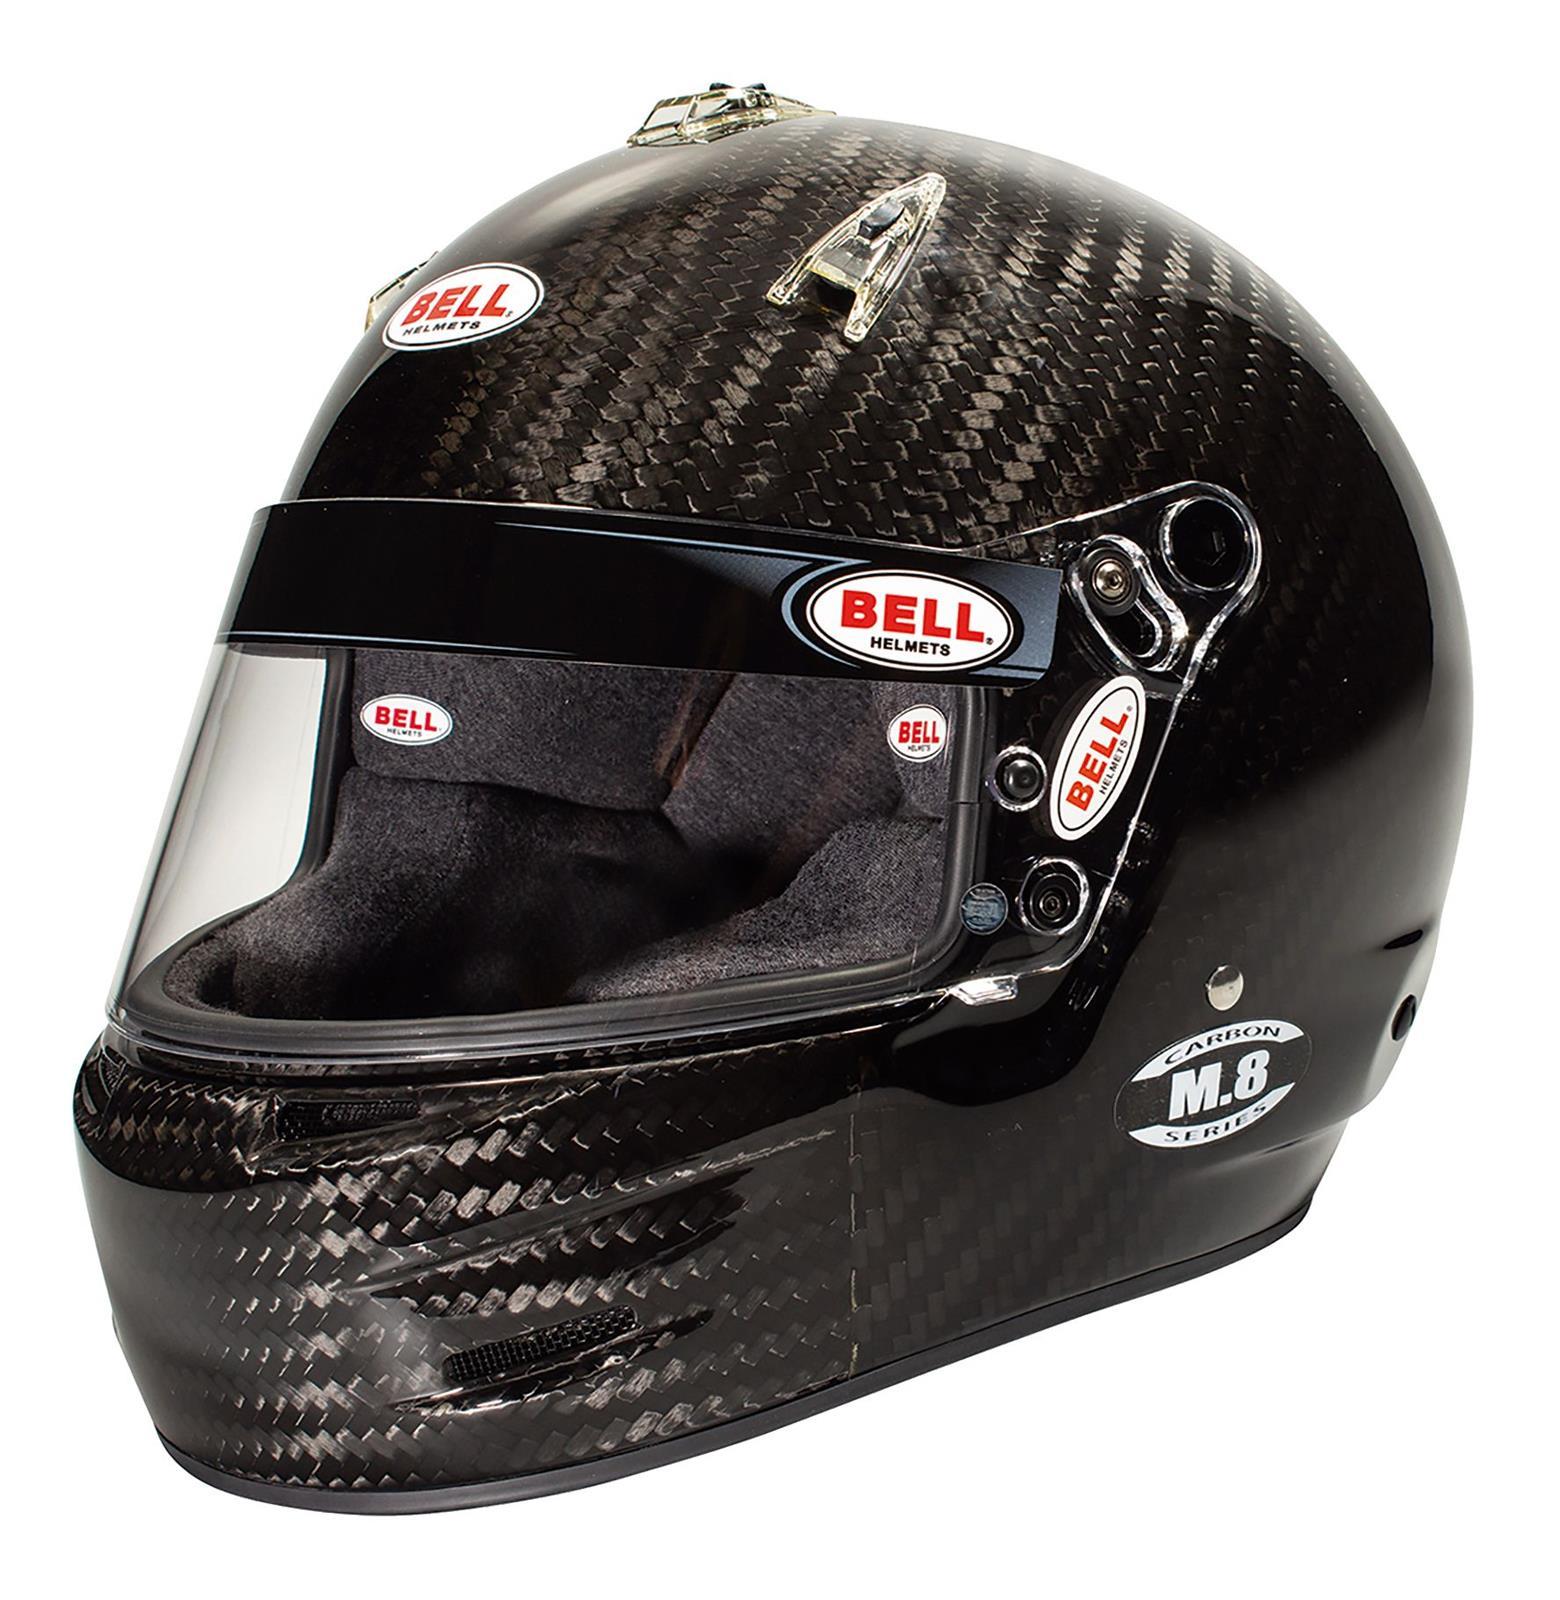 Bell Helmets 1208A06 Helmet, M8, Snell SA2020, FIA Approved, Head and Neck Support Ready, Carbon Fiber, Size 7-1/2, Each